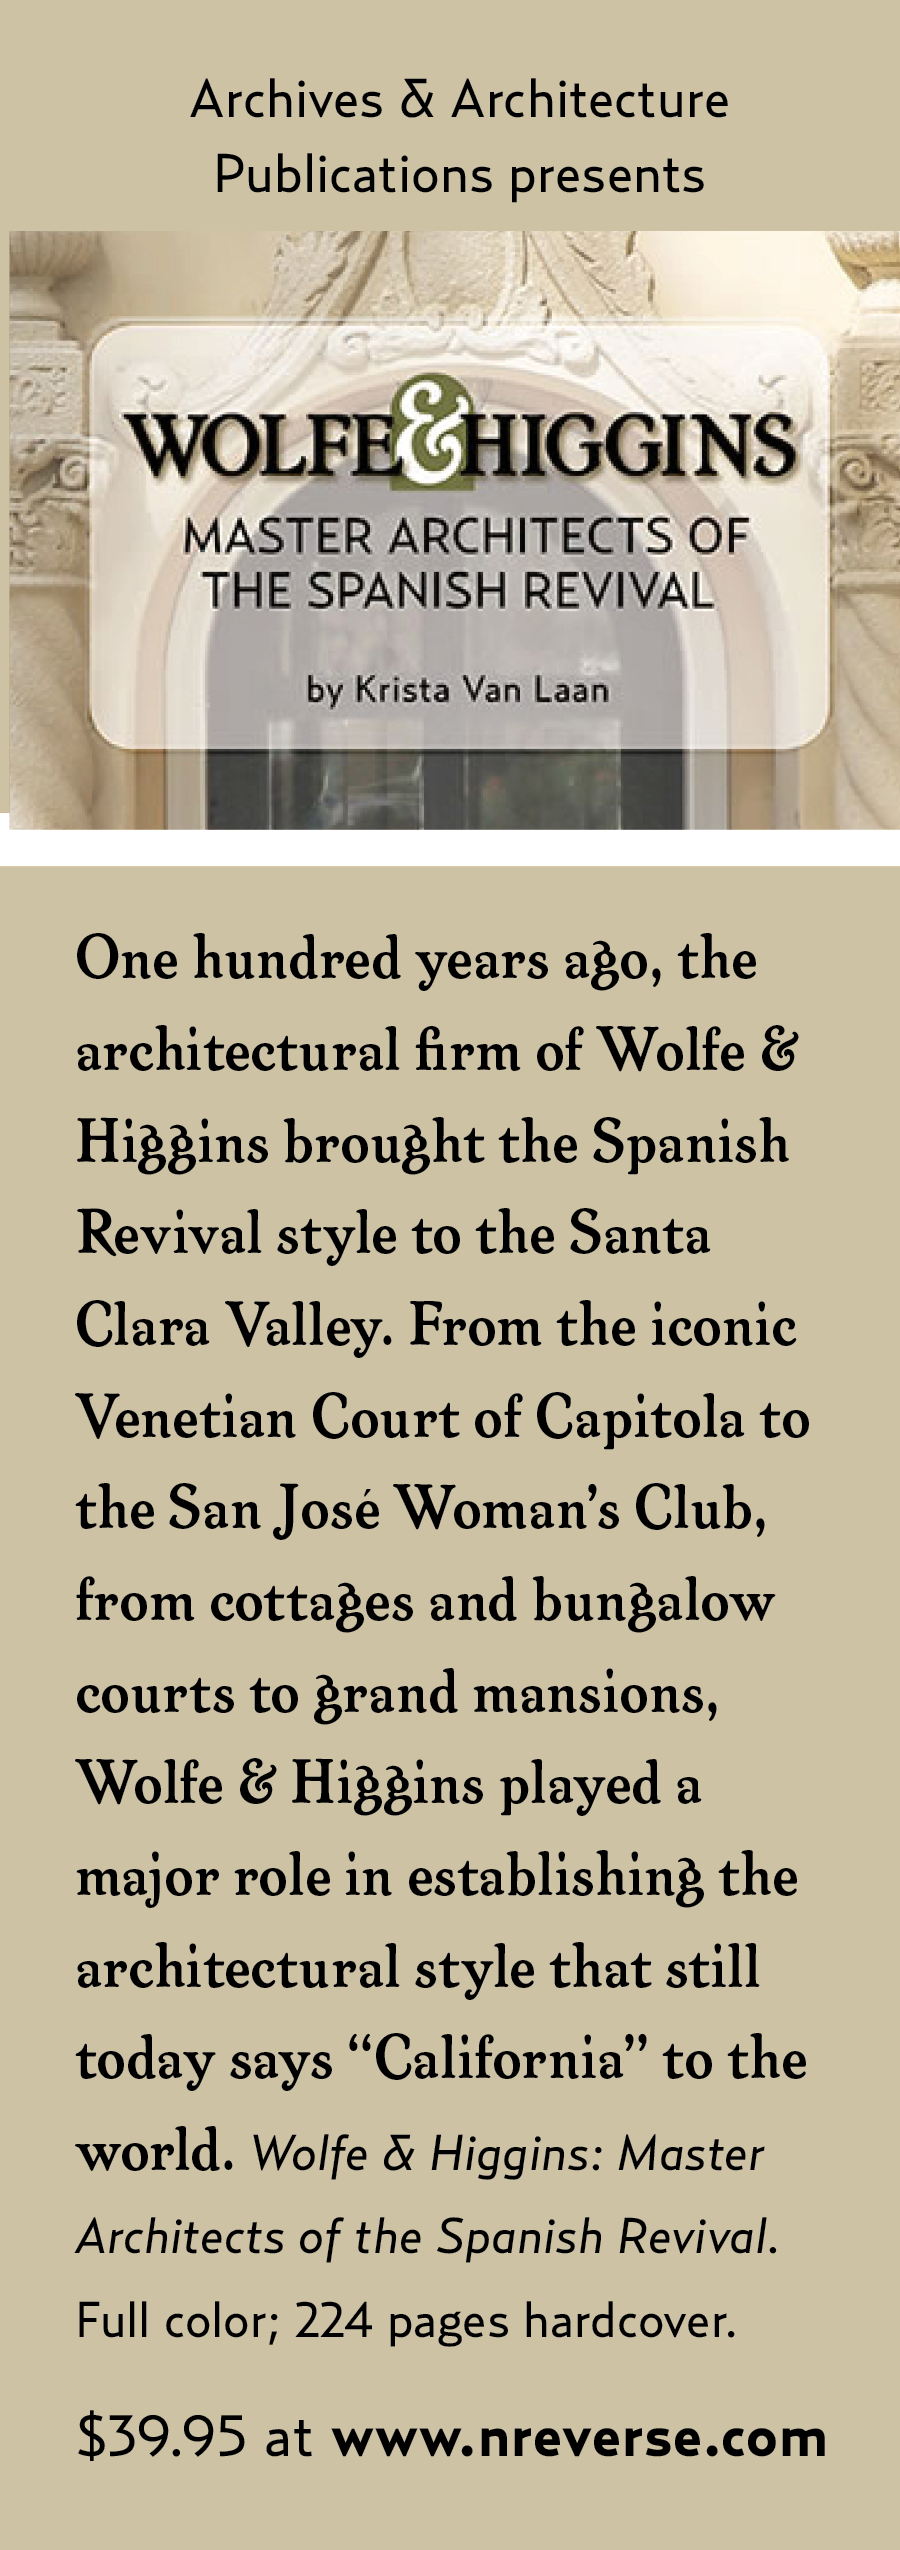 Wolfe & Higgins: Master Architects of the Spanish Revival, book by Krista Van Laan